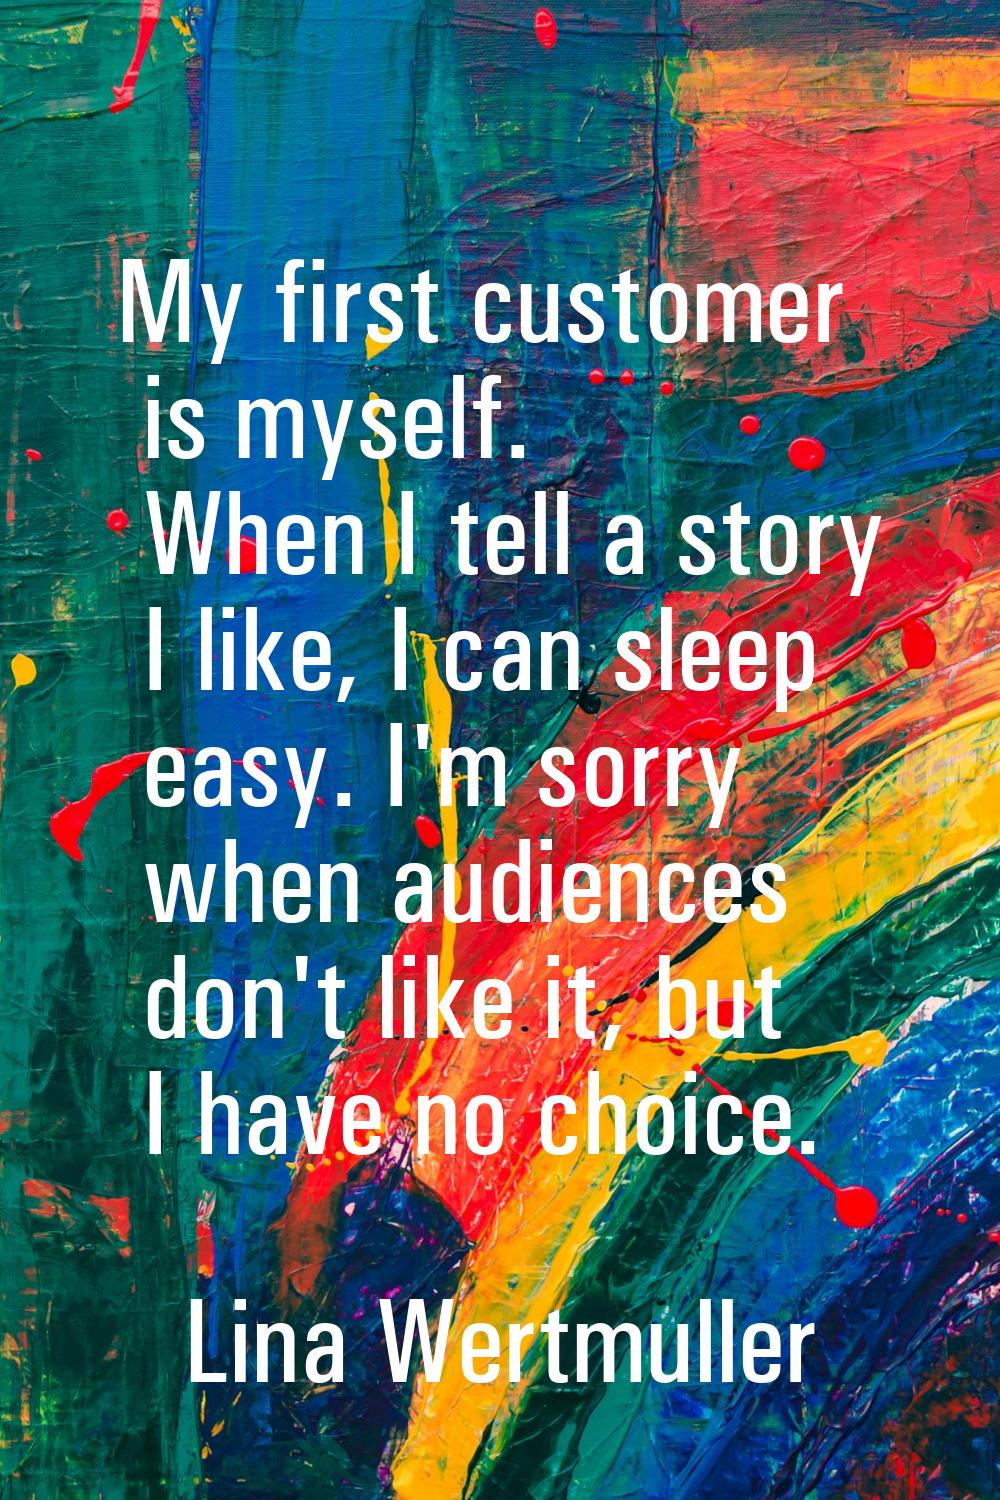 My first customer is myself. When I tell a story I like, I can sleep easy. I'm sorry when audiences